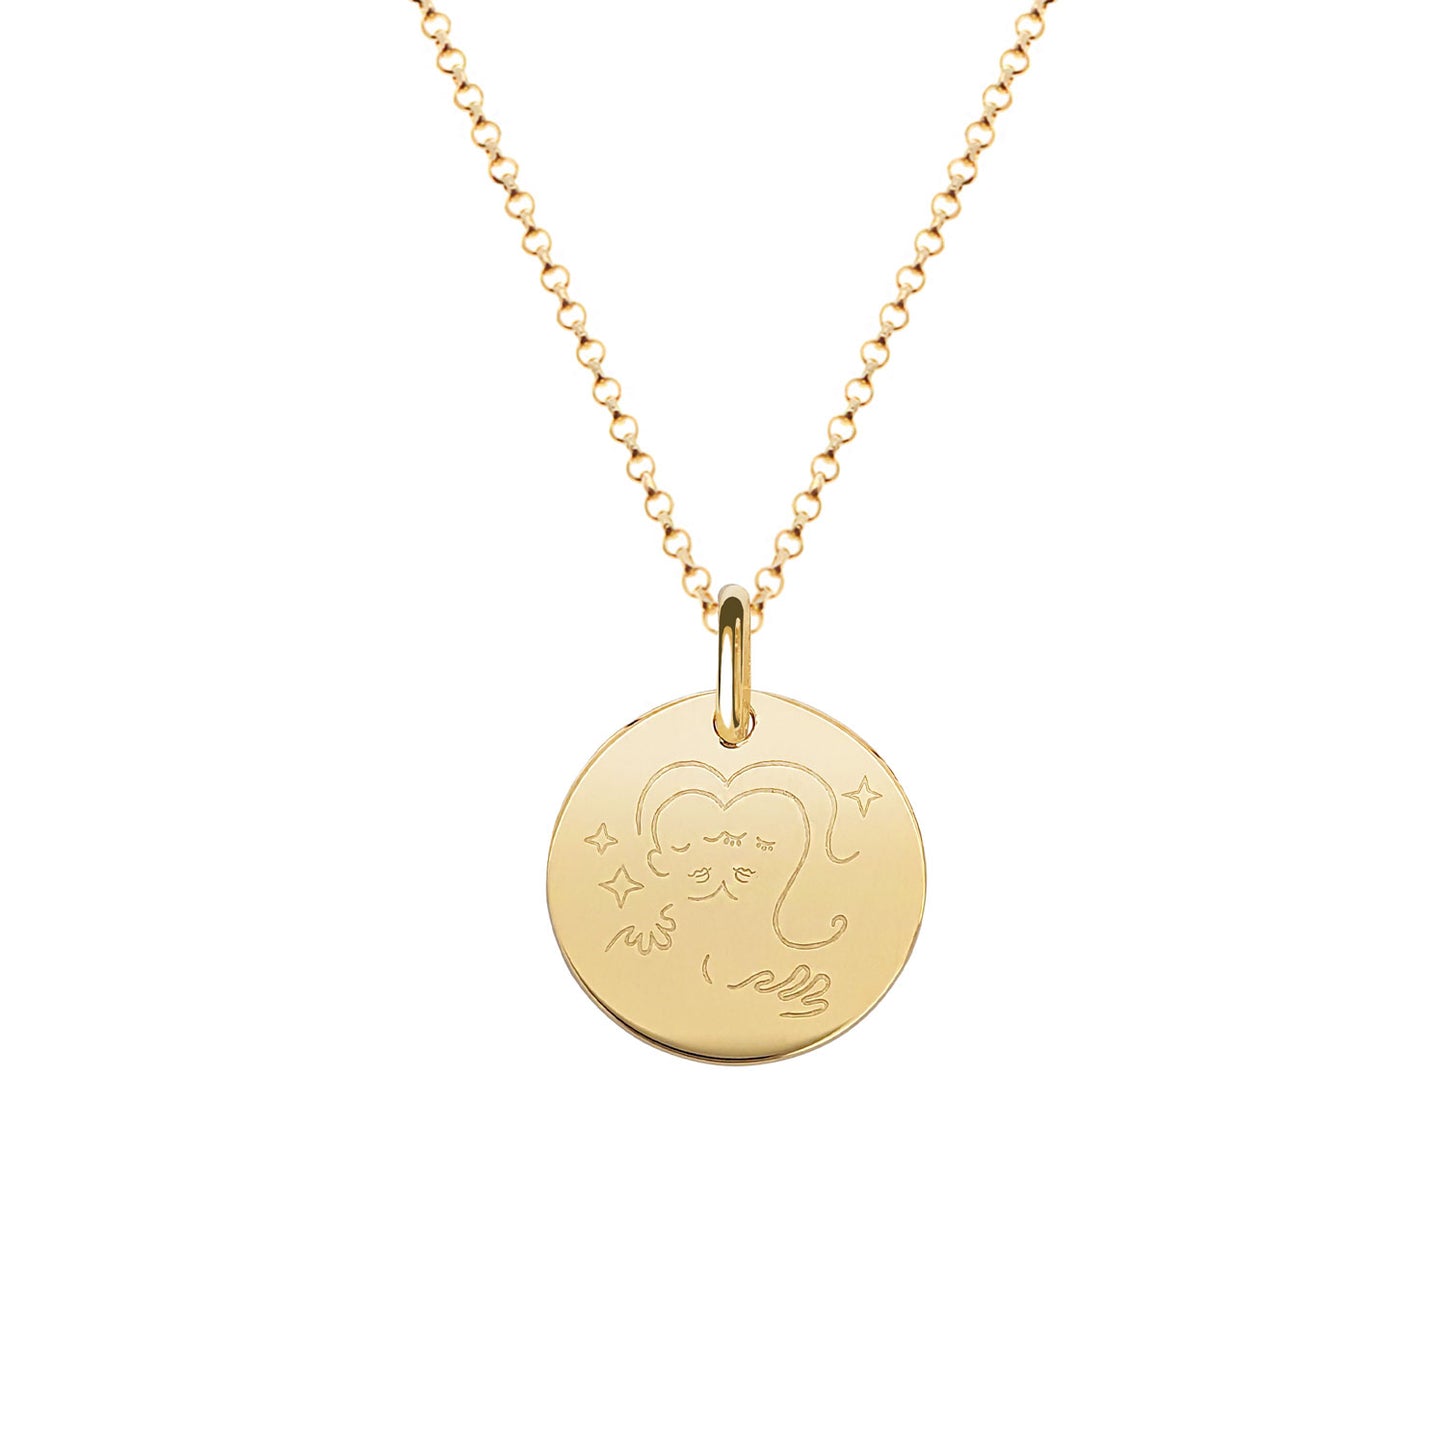 Muze 18k gold vermeil soul medal necklace, art inspired jewelry, dainty talisman symbol of love, friendship, complicity .Meaningful sentimental gift perfect for wife girlfriend or as friendship present